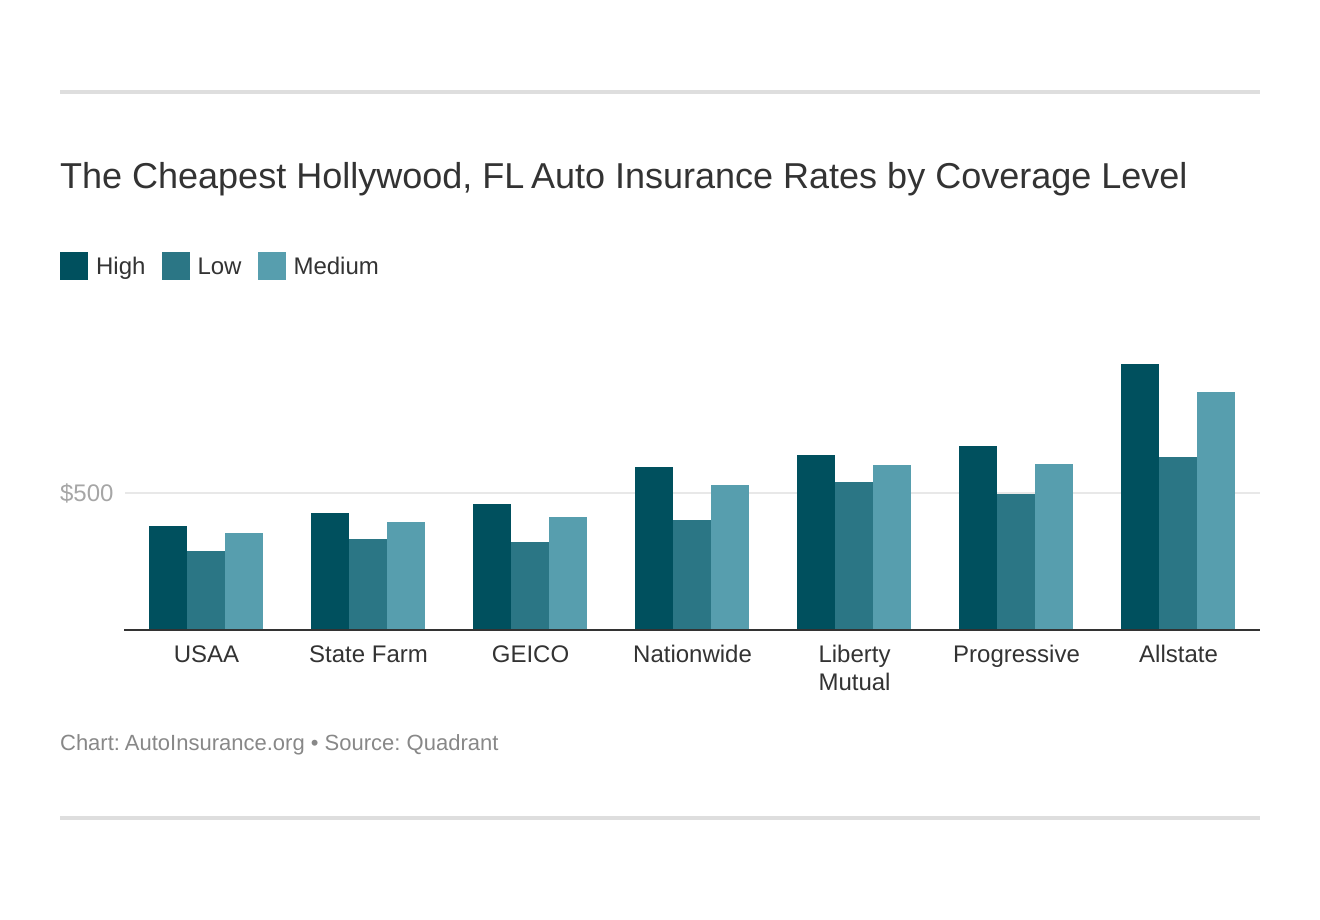 The Cheapest Hollywood, FL Auto Insurance Rates by Coverage Level